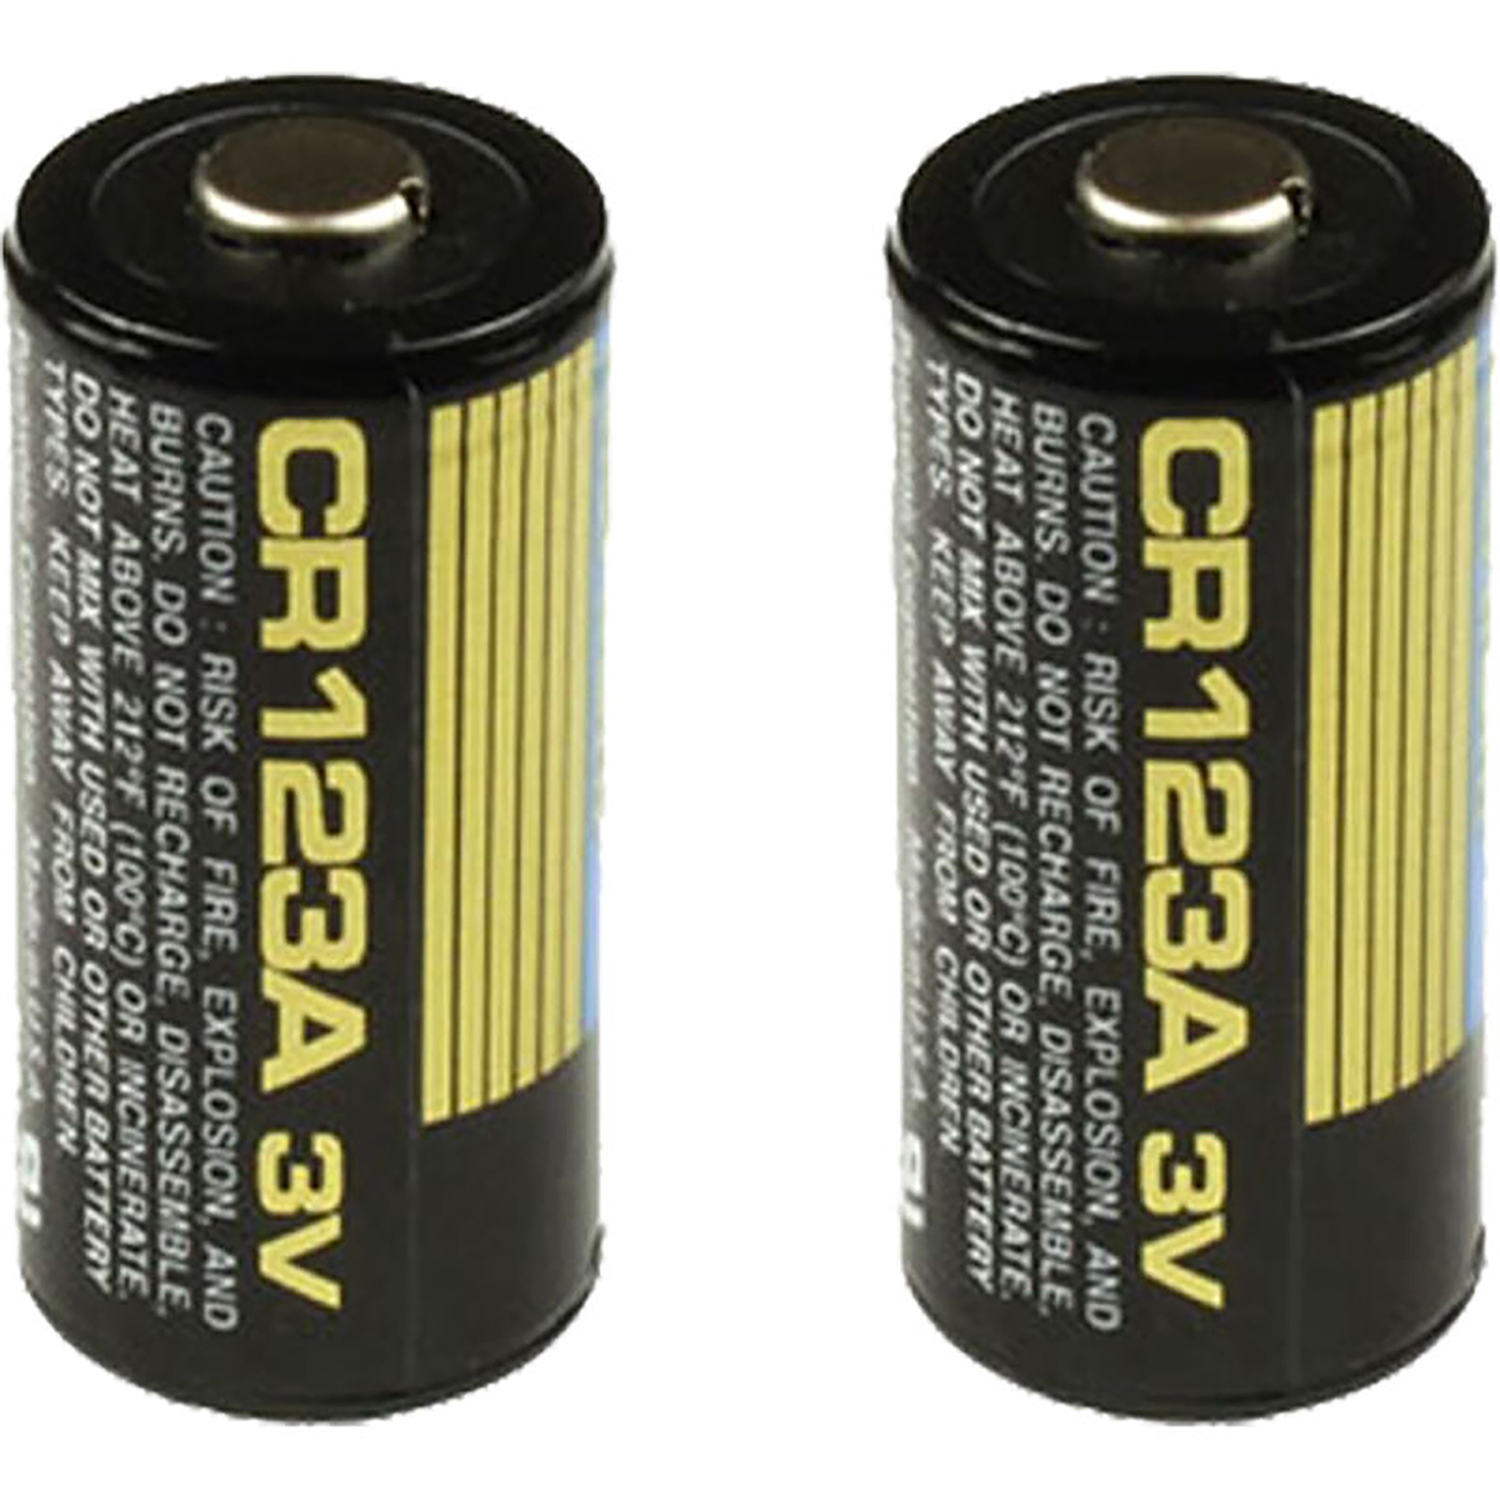 TRUGLO CR123A LITHIUM ION BATTERIES 2-PACK